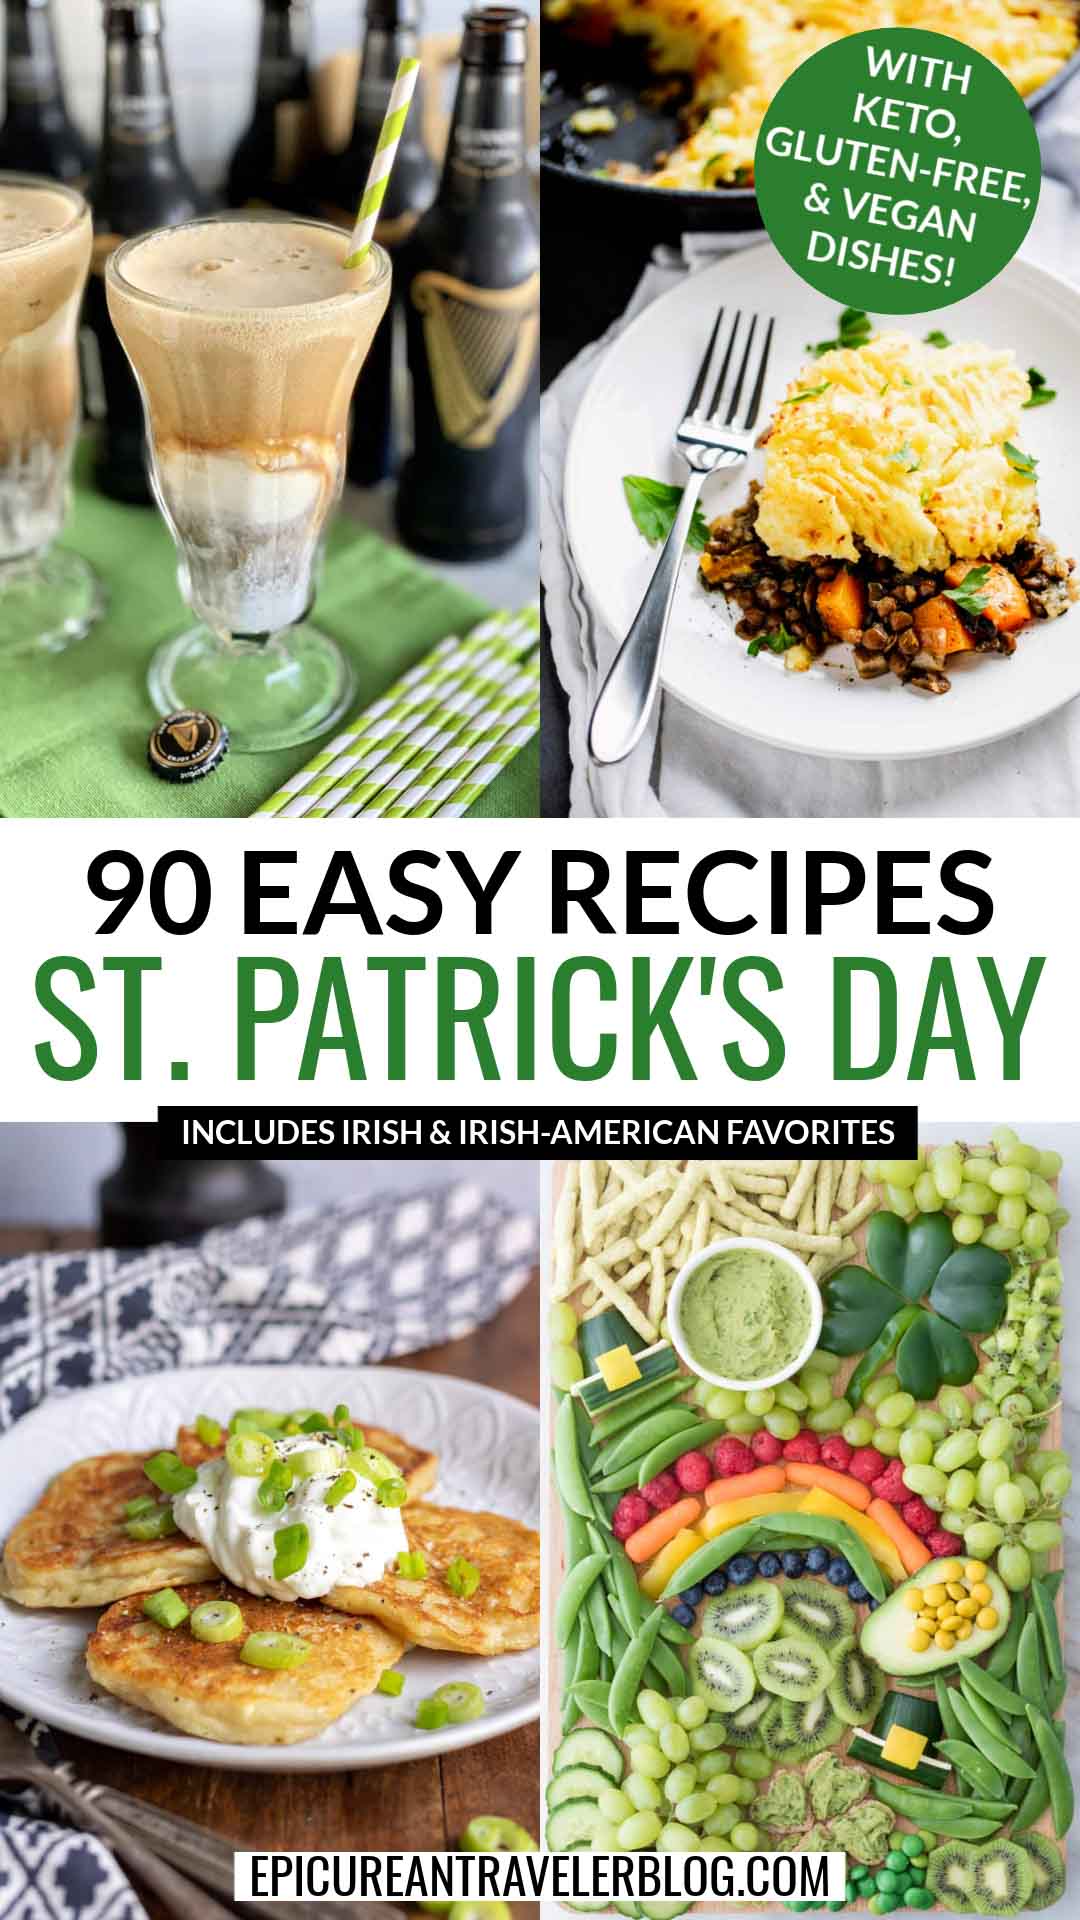 90 easy recipes for St. Patrick's Day including traditional Irish and Irish-American foods with keto, gluten-free, and vegan recipe variations